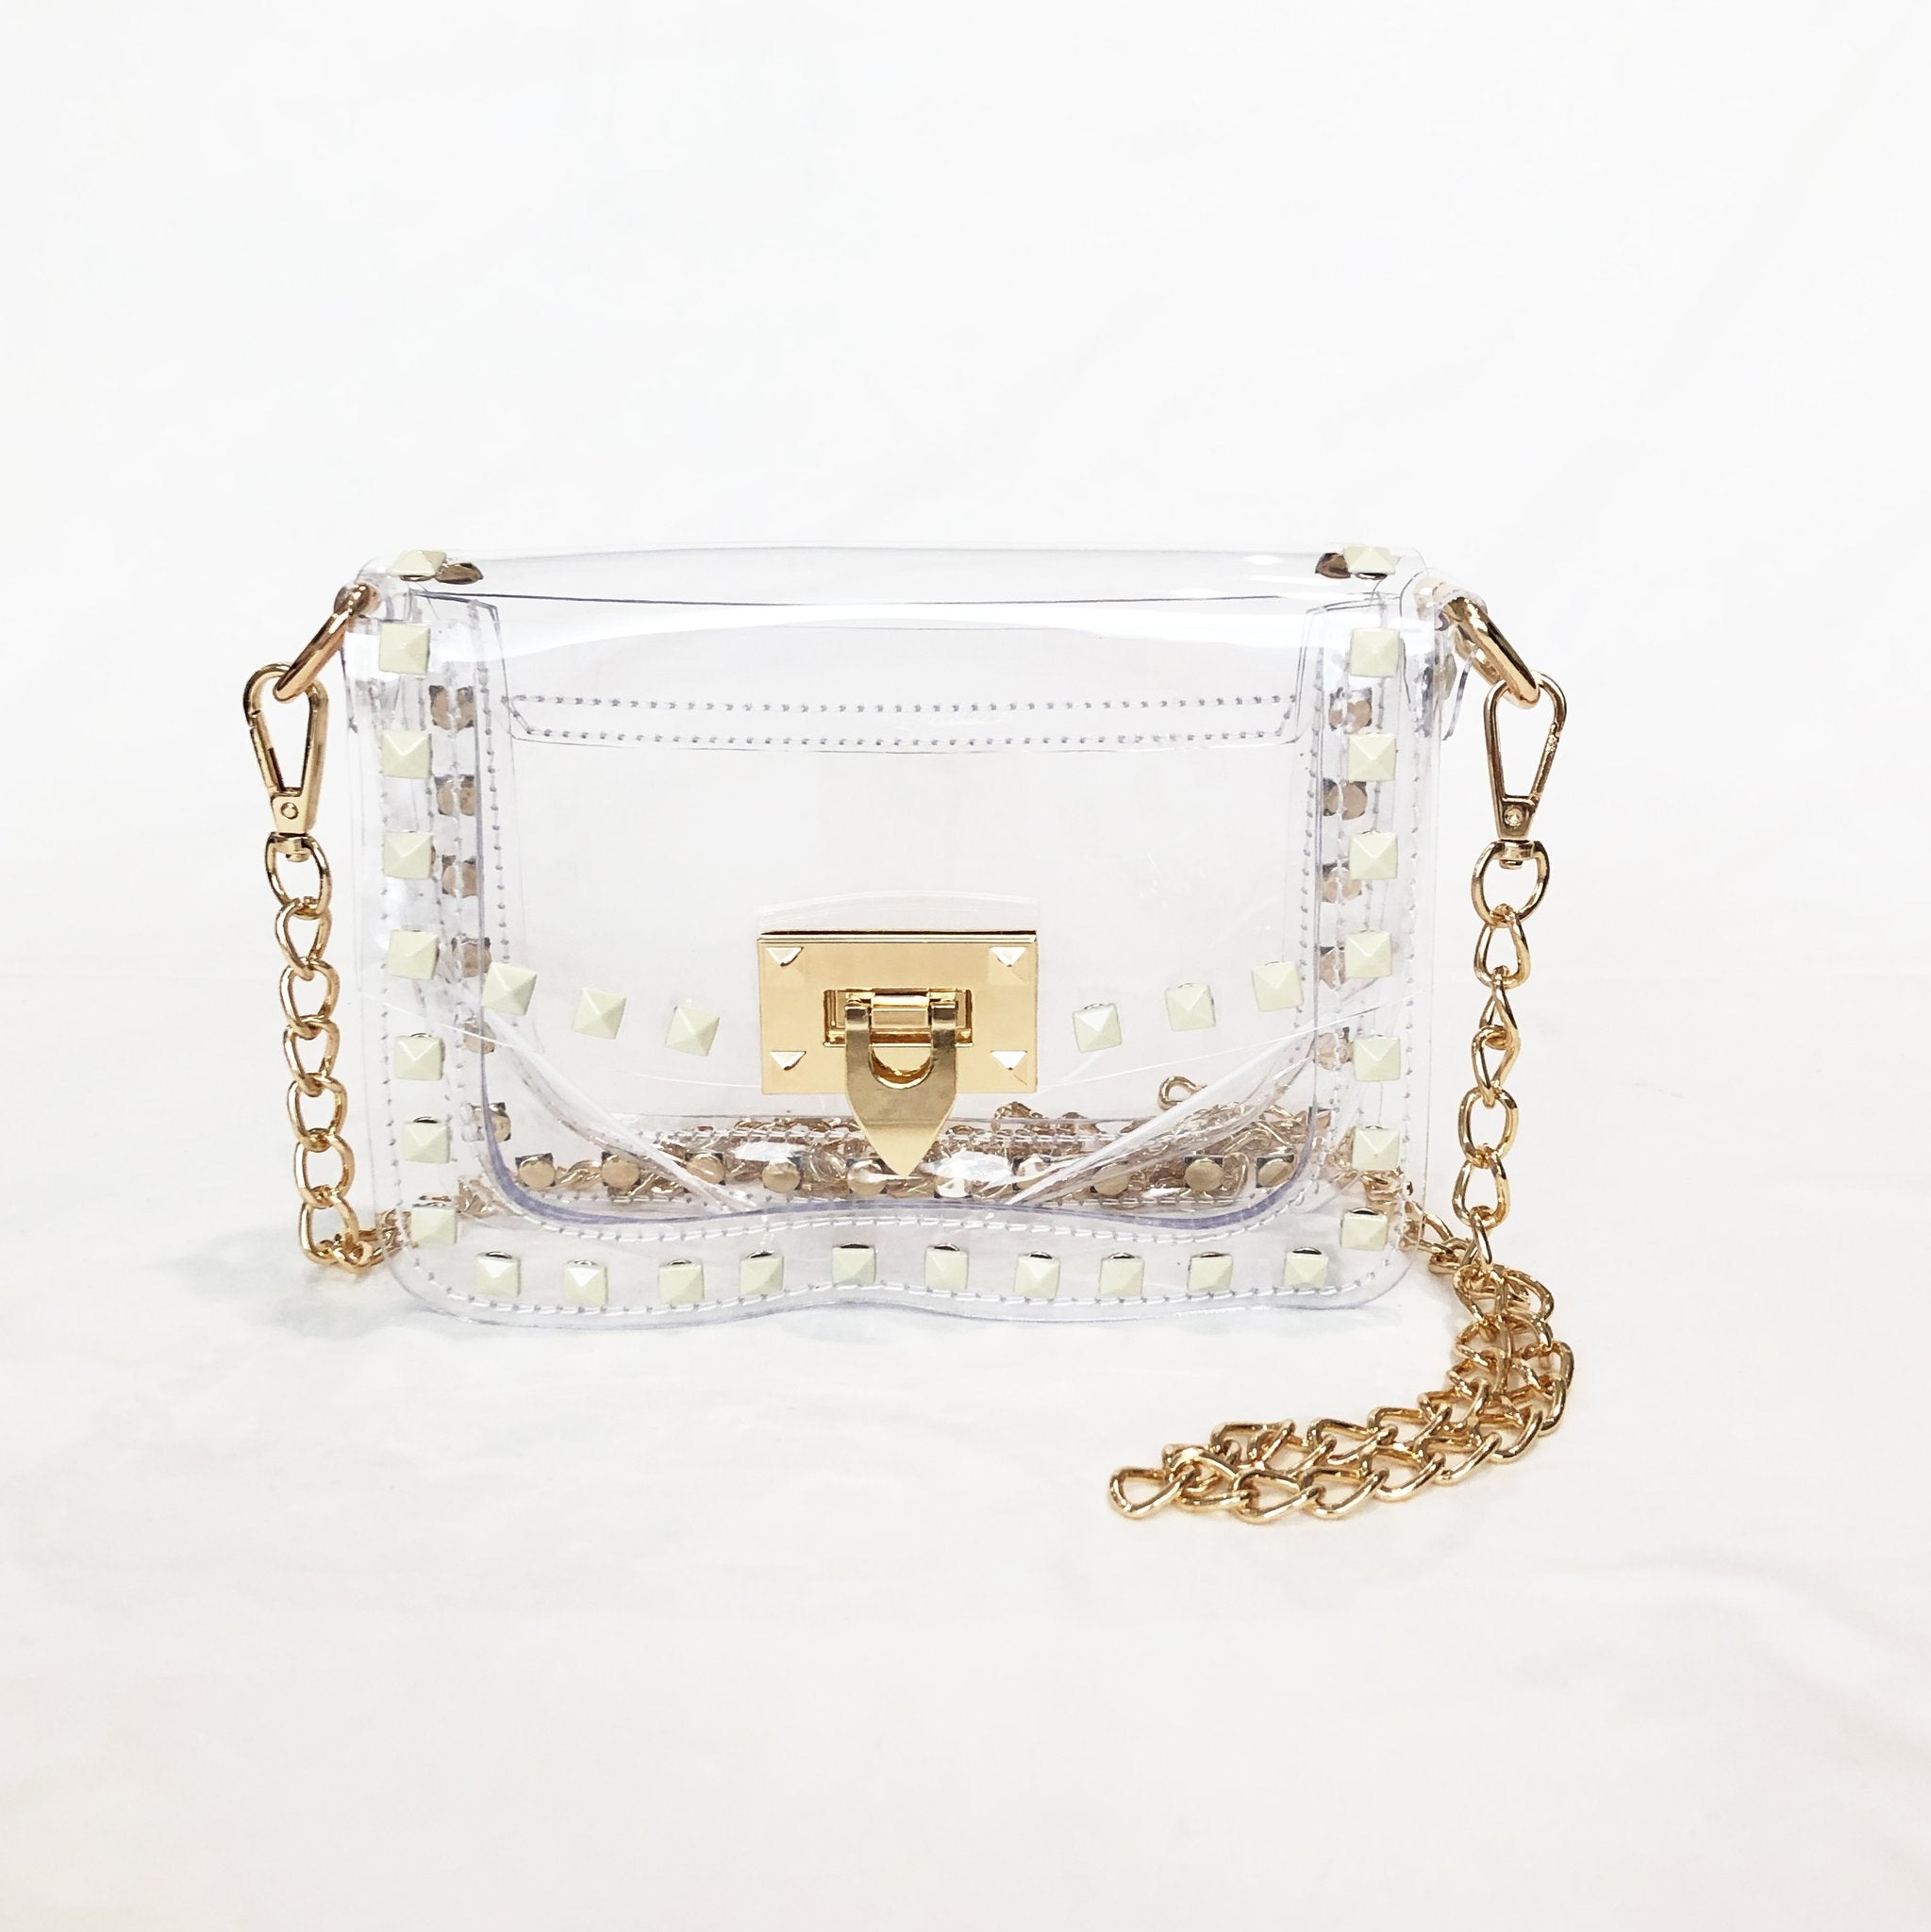 Buy Ivory Mini Purse Sling Bag Online - Accessorize India